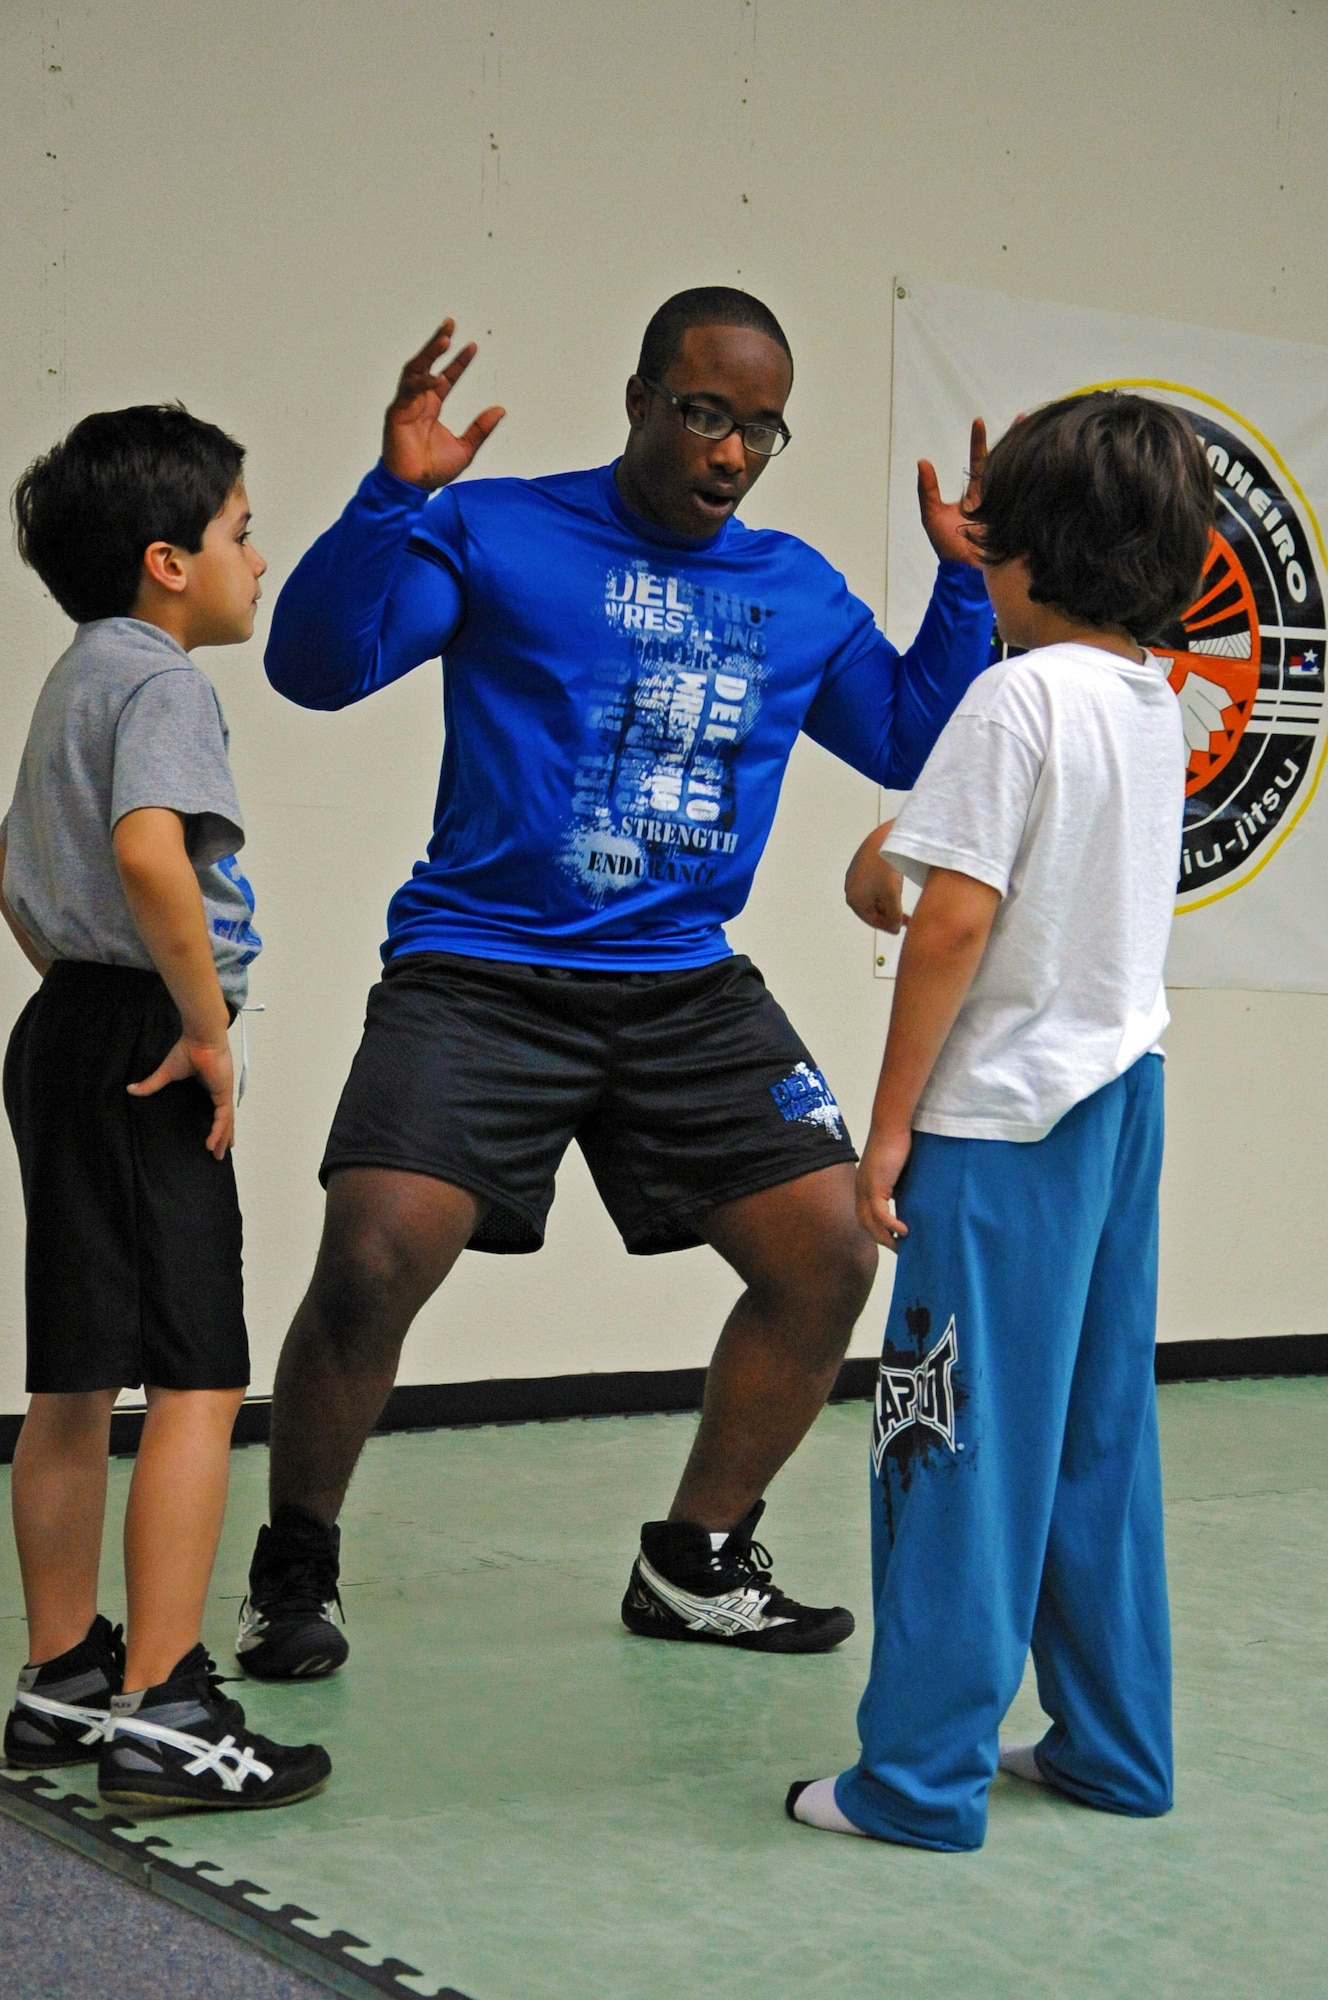 LAUGHLIN AIR FORCE BASE, Texas – 2nd Lt. Randall Mitchner, Del Rio Thunder coach, explains wrestling fundamentals to two of his students during a practice at the Eclipse Brazilian Jiu Jitsu gym in Del Rio, Texas, Feb. 2. The Del Rio Thunder wrestling team was recently created by Laughlin Airmen in late November after finding out there was no wrestling team for the middle school students. (U.S. Air Force photo/Senior Airman Scott Saldukas) 